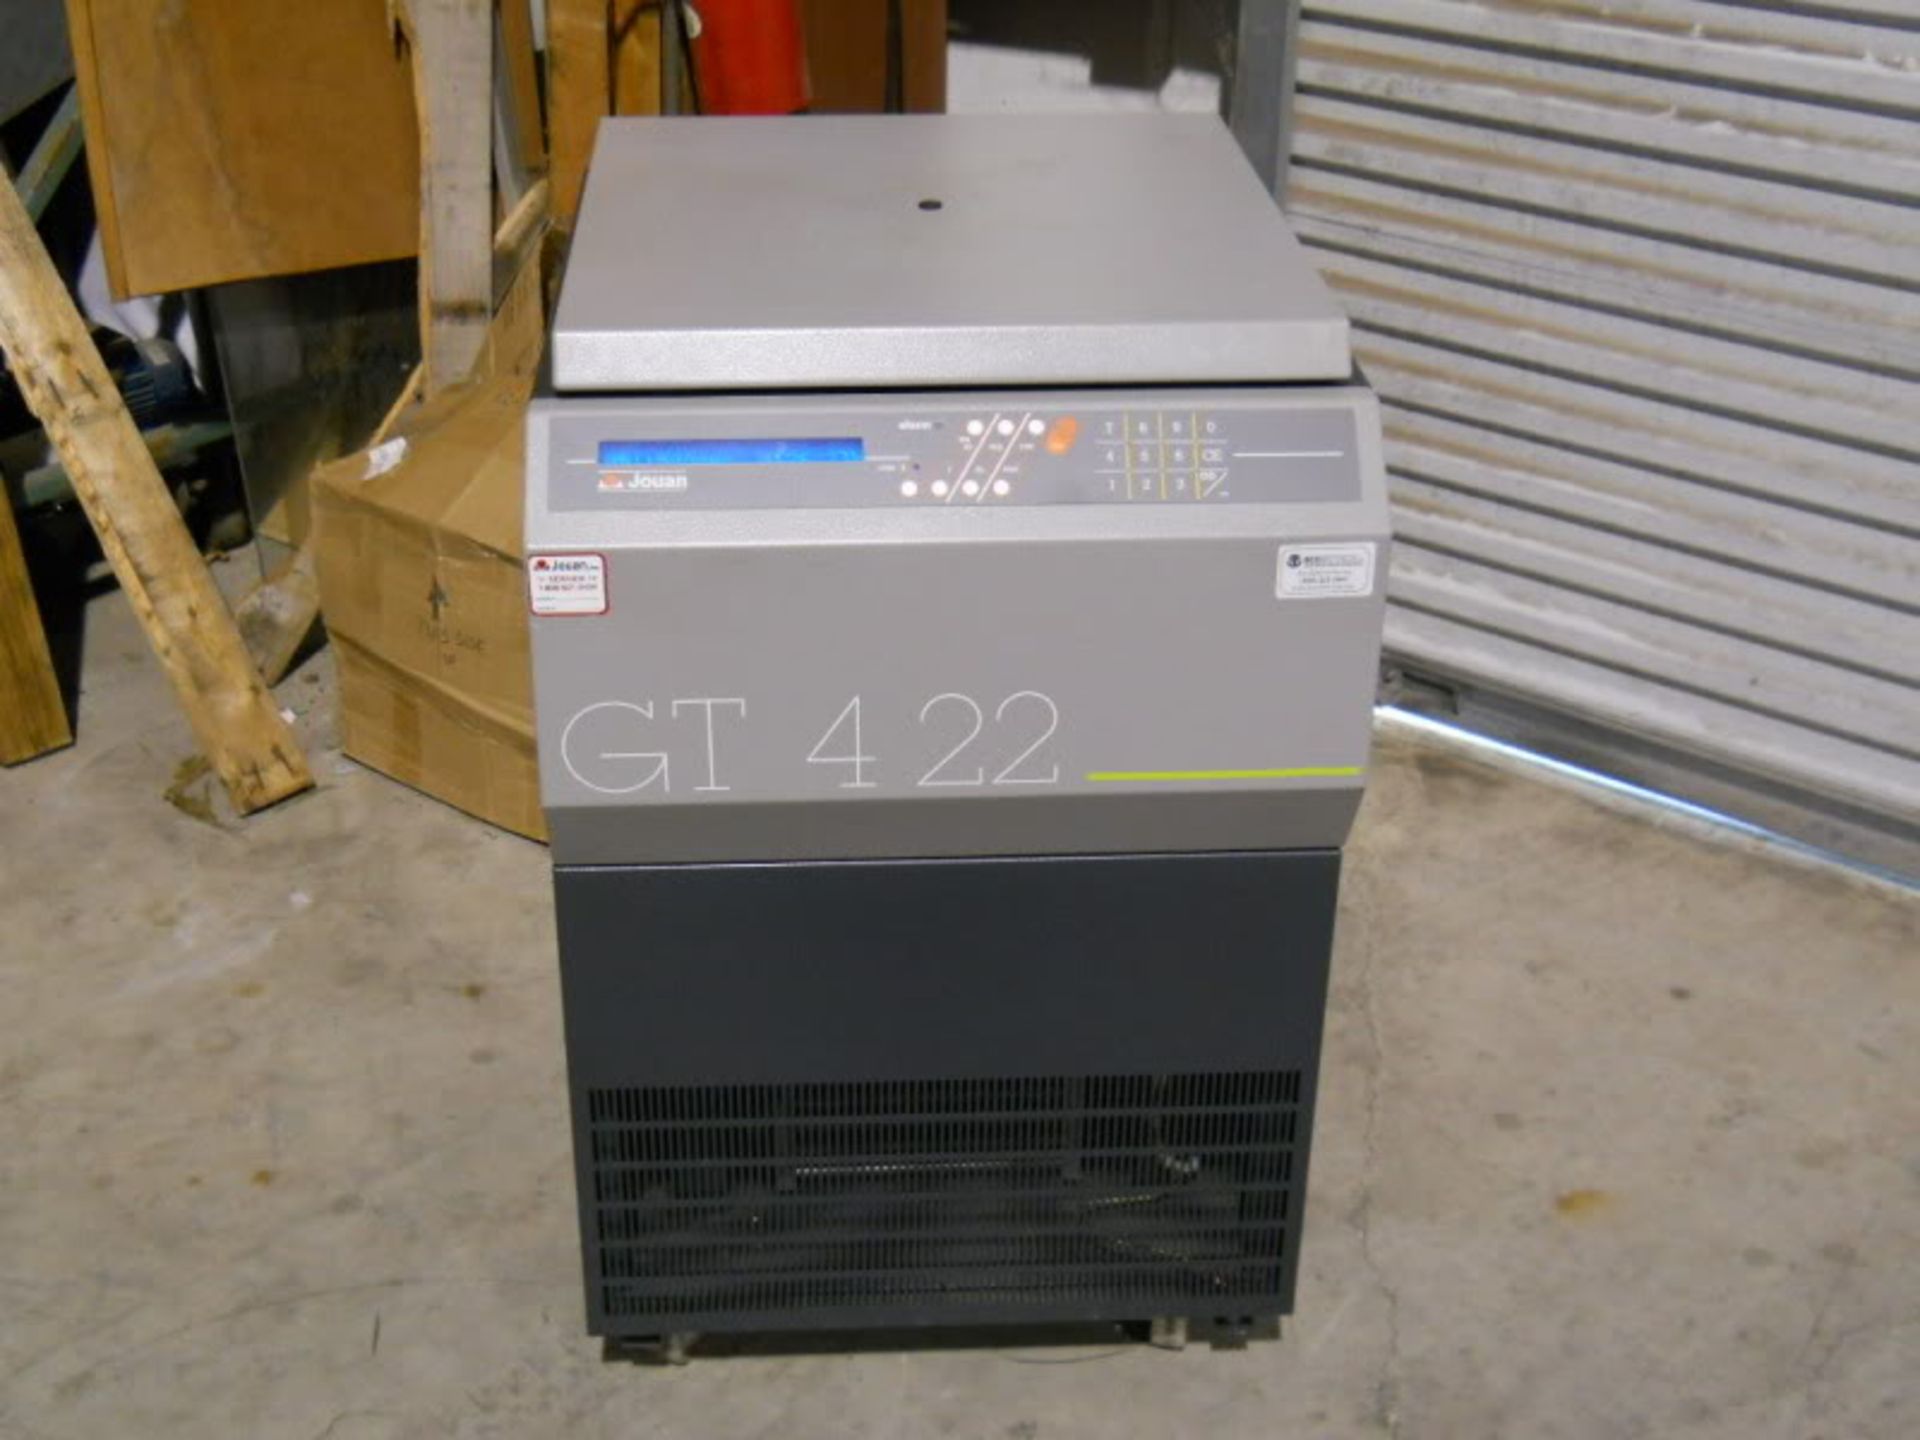 Jouan GT4-22 Refrigerated Centrifuge (Parts) Doesn't Get Cold, Qty 1, 221116409446